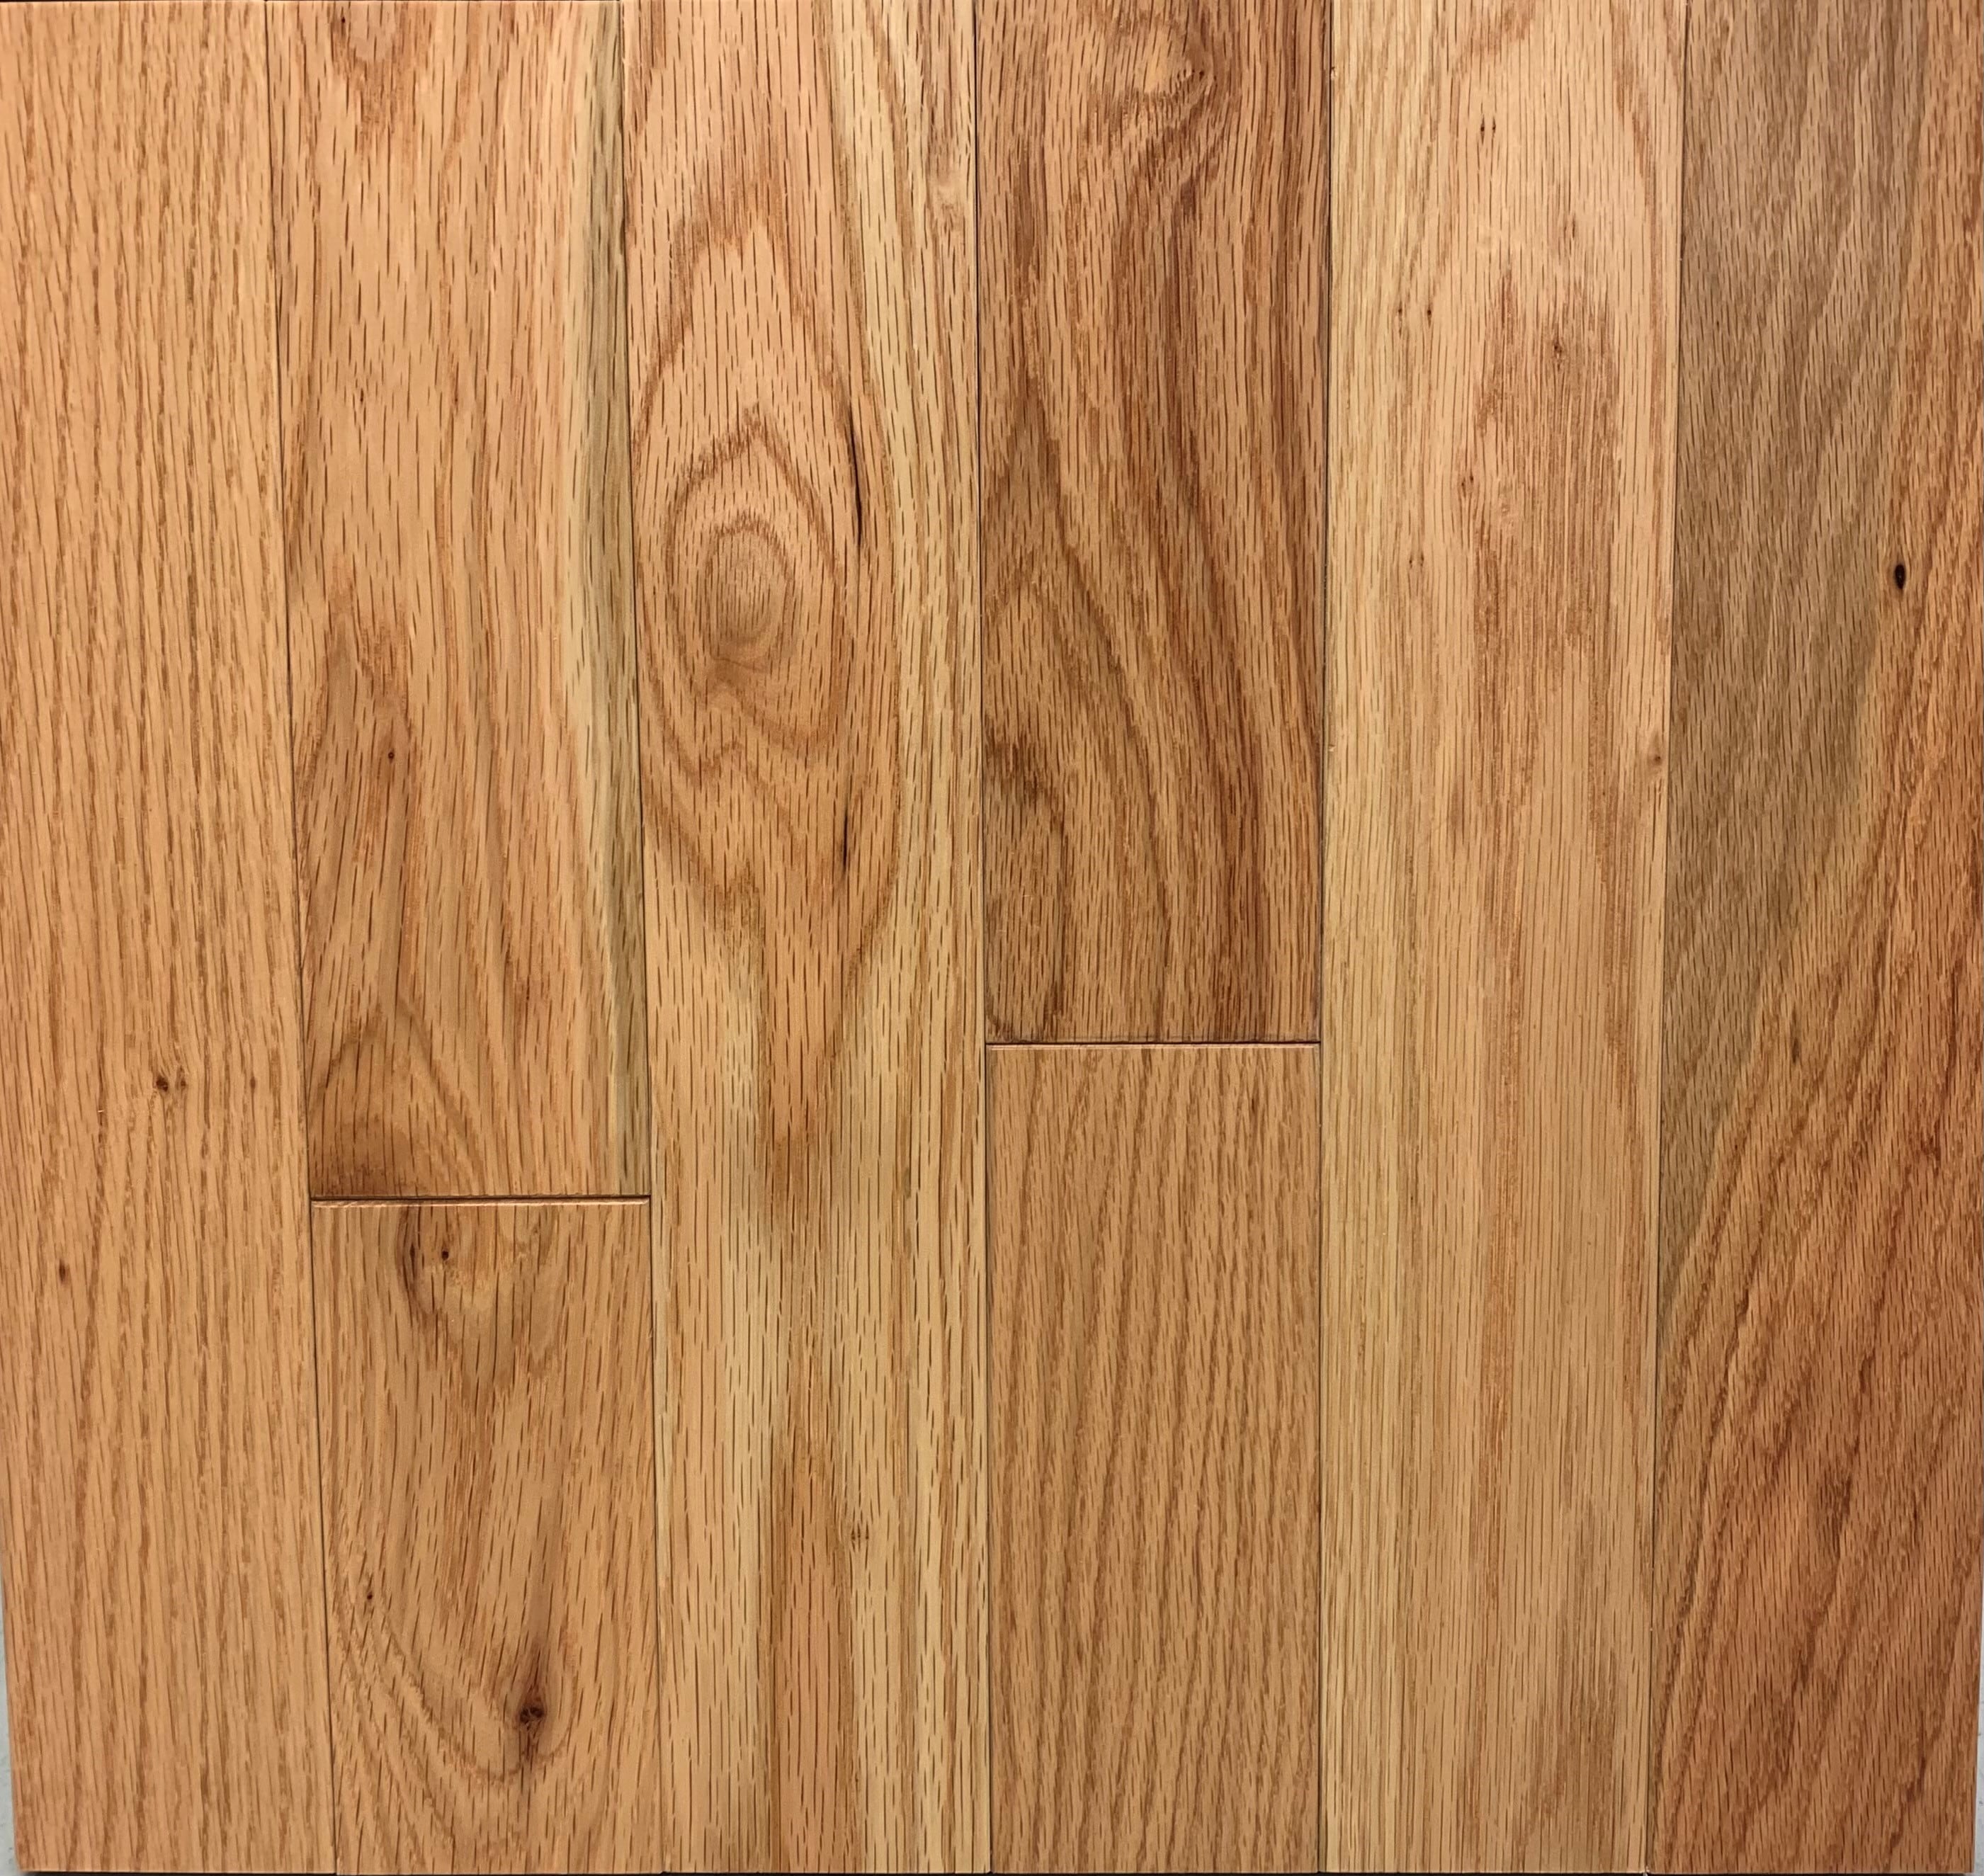 Natural Oak 3-1/4-in W x 3/4-in T x Varying Length Smooth/Traditional Solid Hardwood Flooring (27-sq ft) in Brown | - allen + roth 3RO700